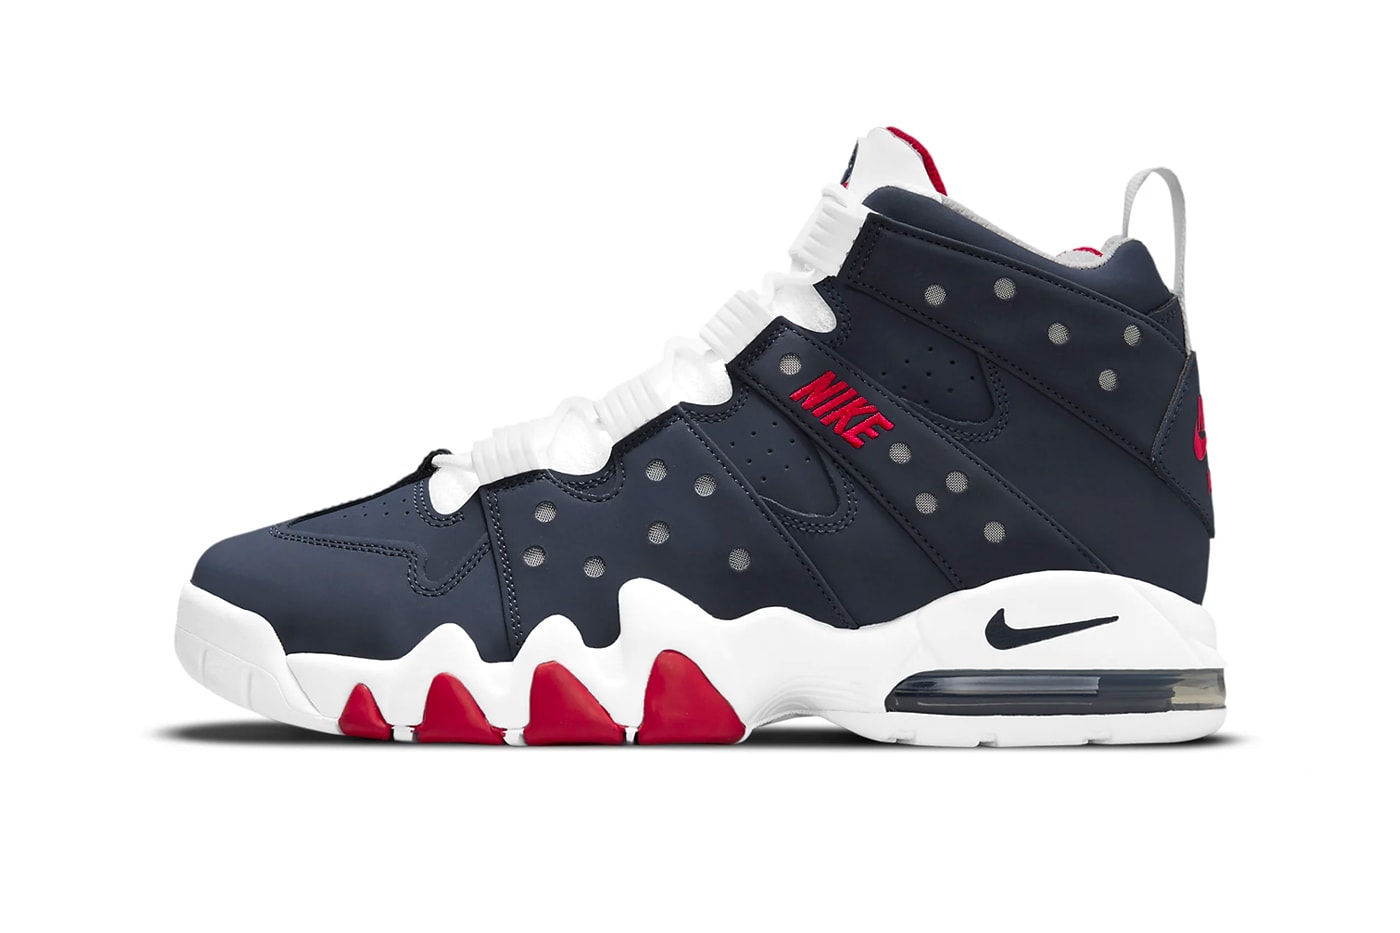 Nike Big Swoosh Brings Together the Zoom Flight '98 The Glove and Air Max  CB '94